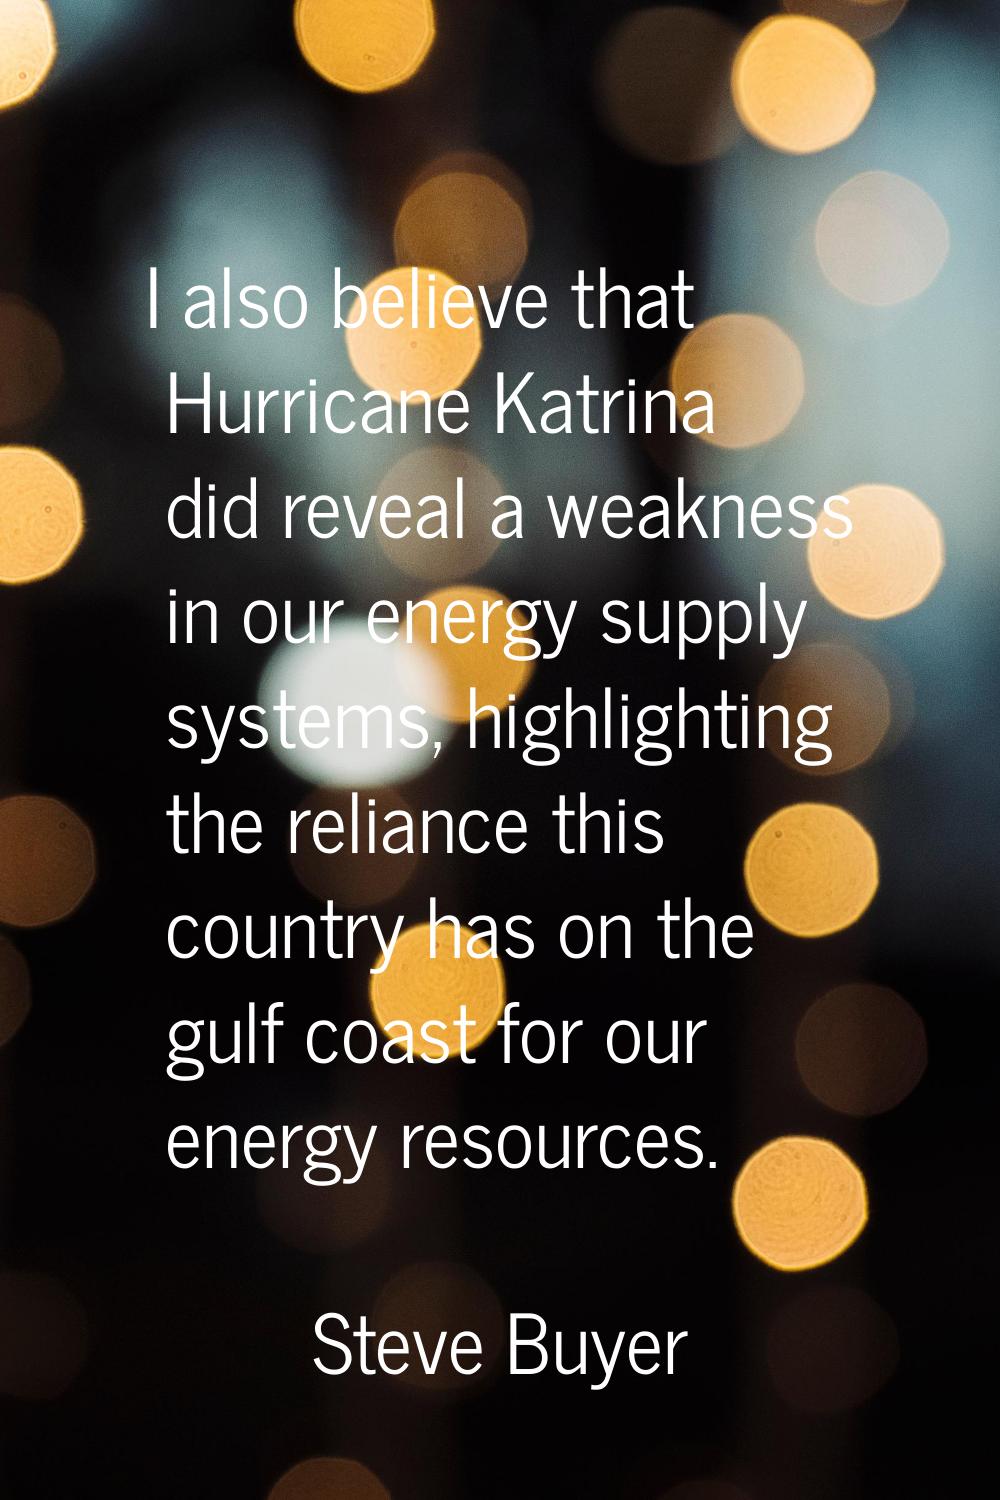 I also believe that Hurricane Katrina did reveal a weakness in our energy supply systems, highlight